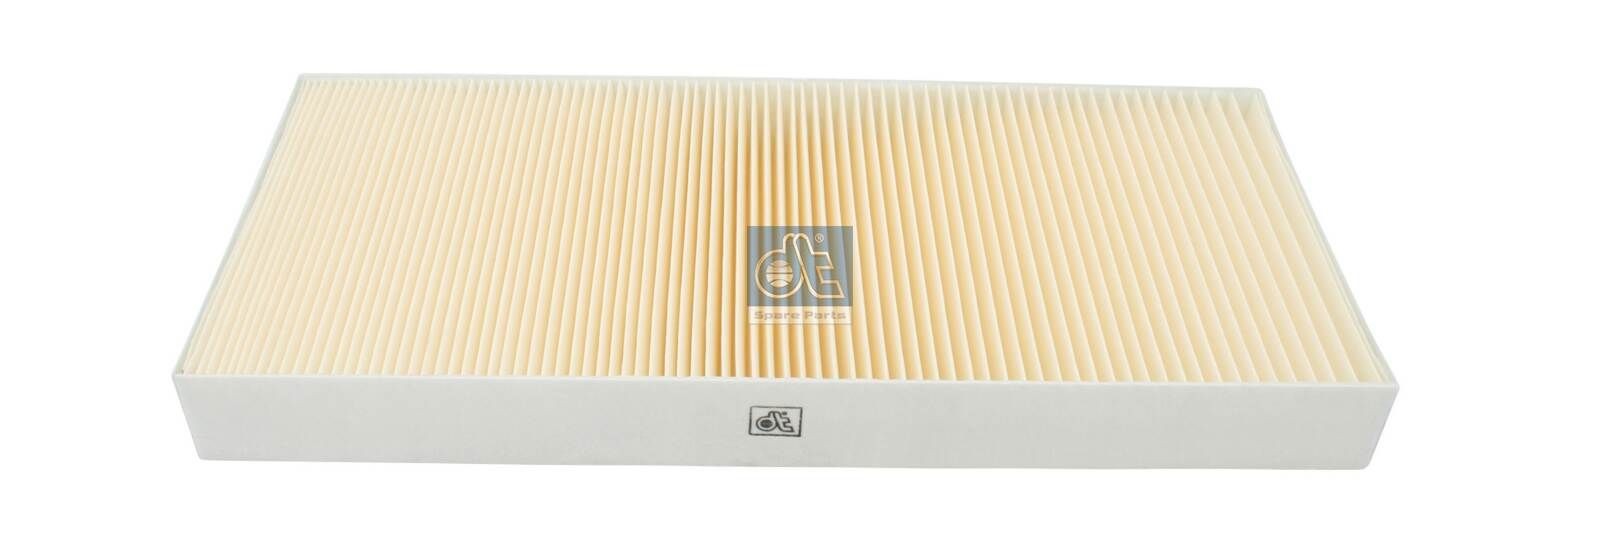 CU 40 110 DT Spare Parts Particulate Filter, 400 mm x 165 mm x 40 mm Width: 165mm, Height: 40mm, Length: 400mm Cabin filter 3.82002 buy